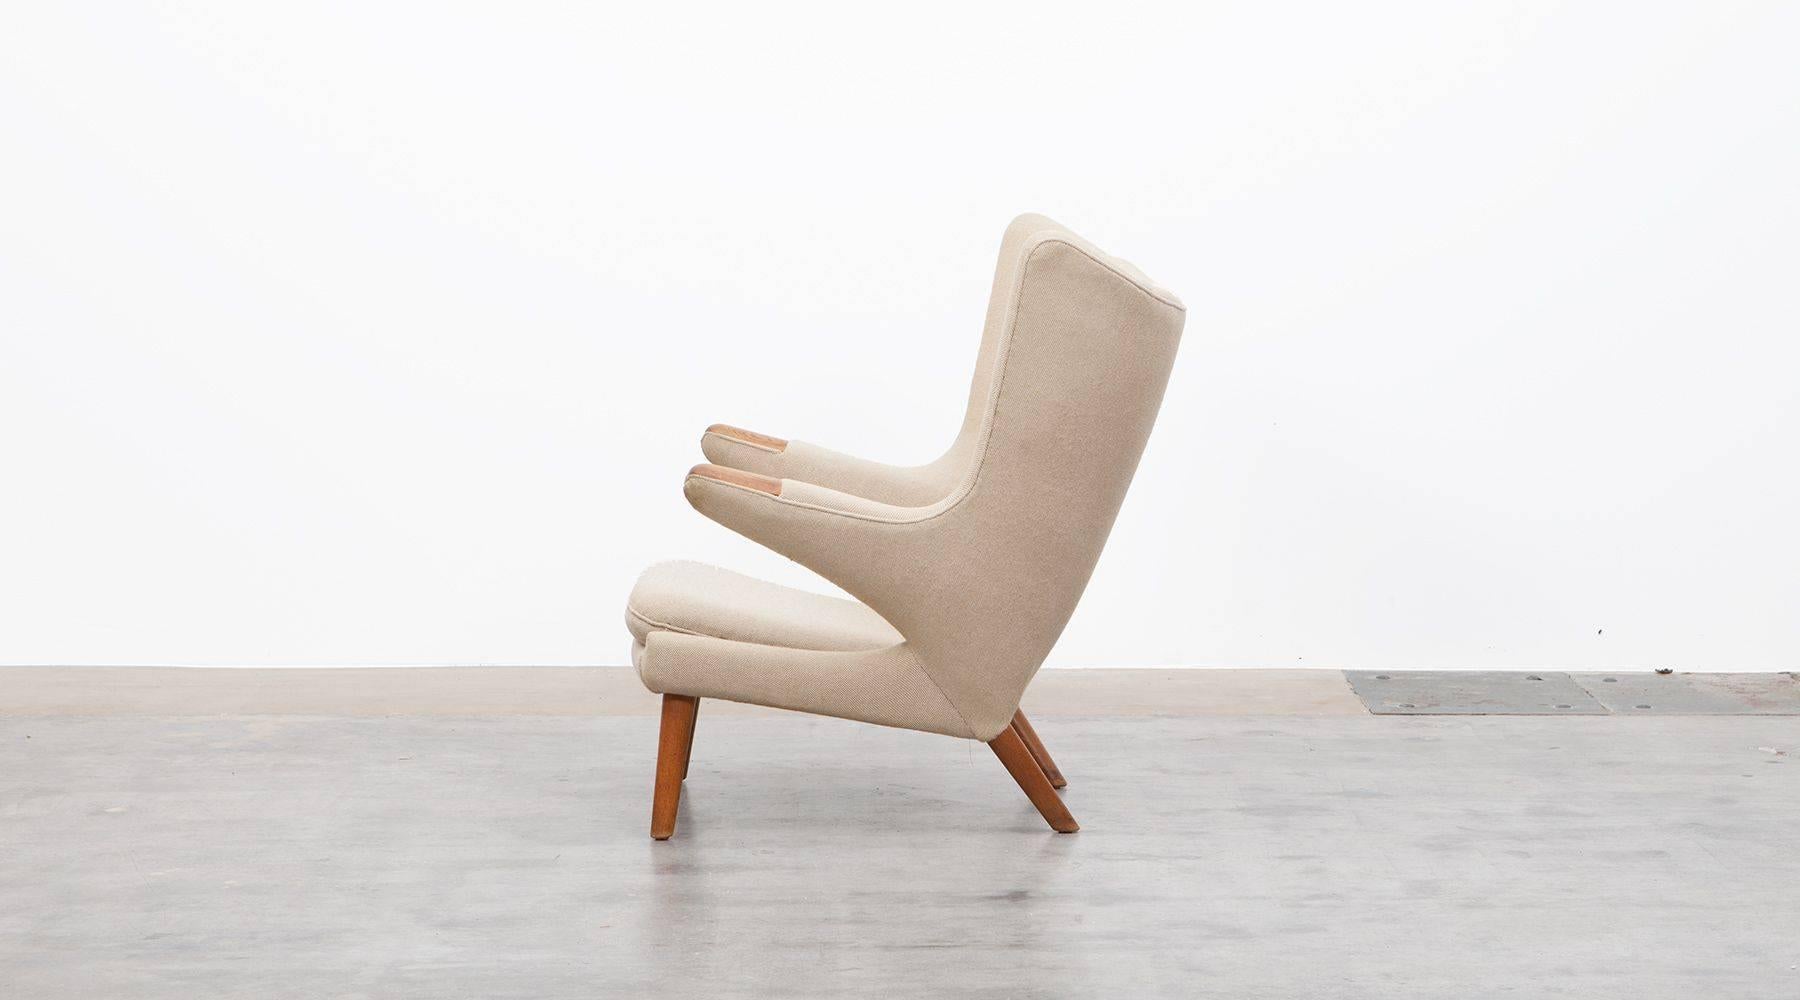 Papa Bear Chair by Hans Wegner manufactured by A.P. Stolen, Denmark, 1951

Wonderful original Papa Bear chair designed by Hans Wegner. This ingenious piece comes in perfect condition, even the upholstery with its high-qualitiy woolen fabric in warm